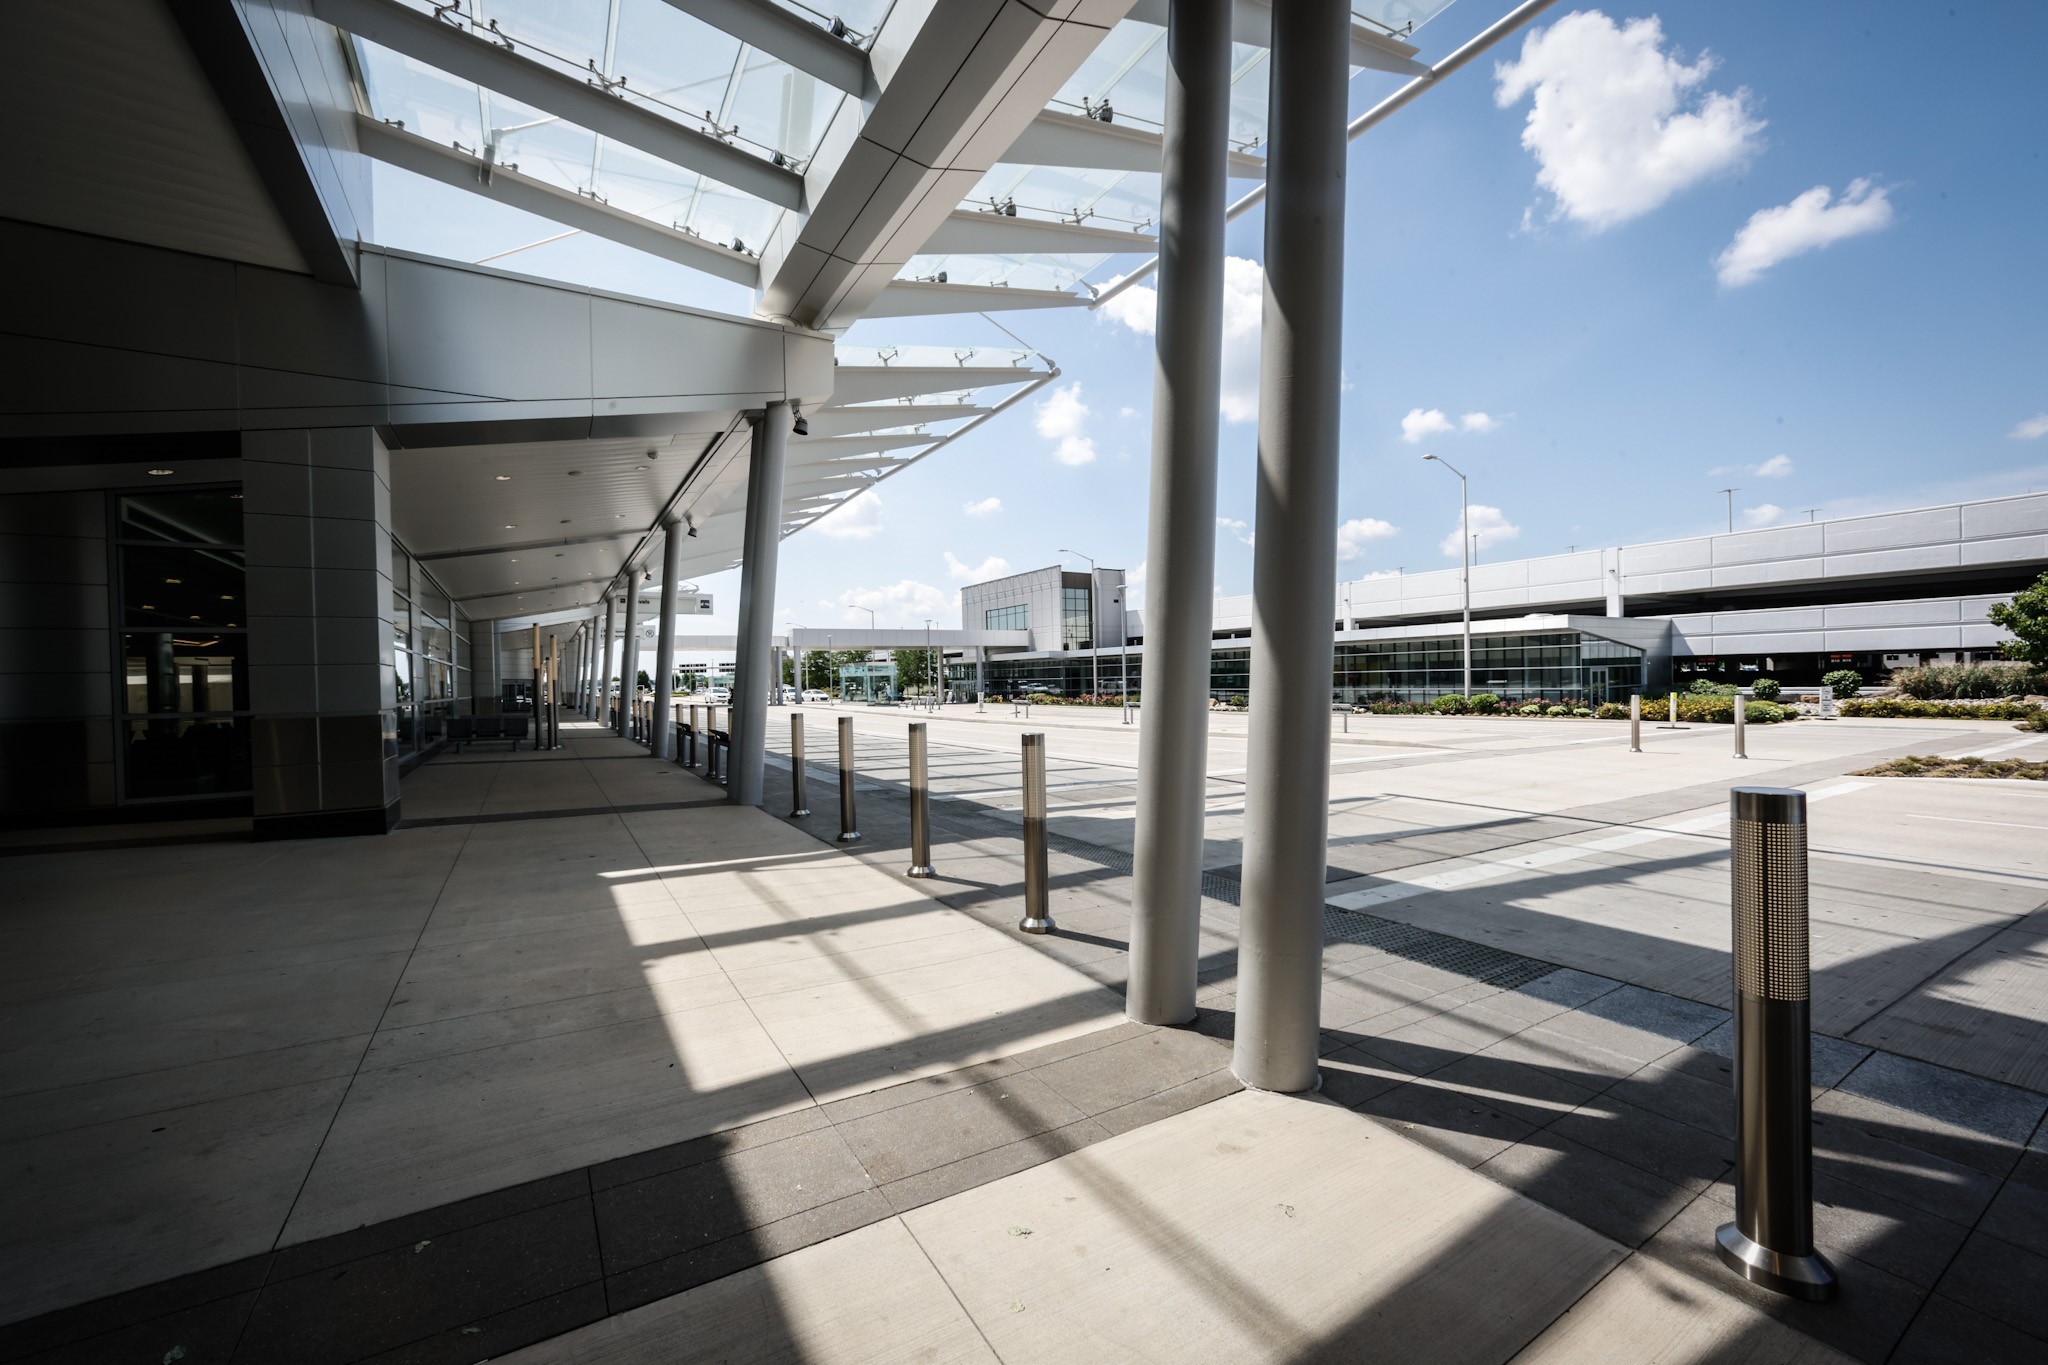 Dayton International Airport received more than $ 4 million in infrastructure funding and is expected to receive up to $ 21 million in the next five years. JIM NOELKER / STAFF